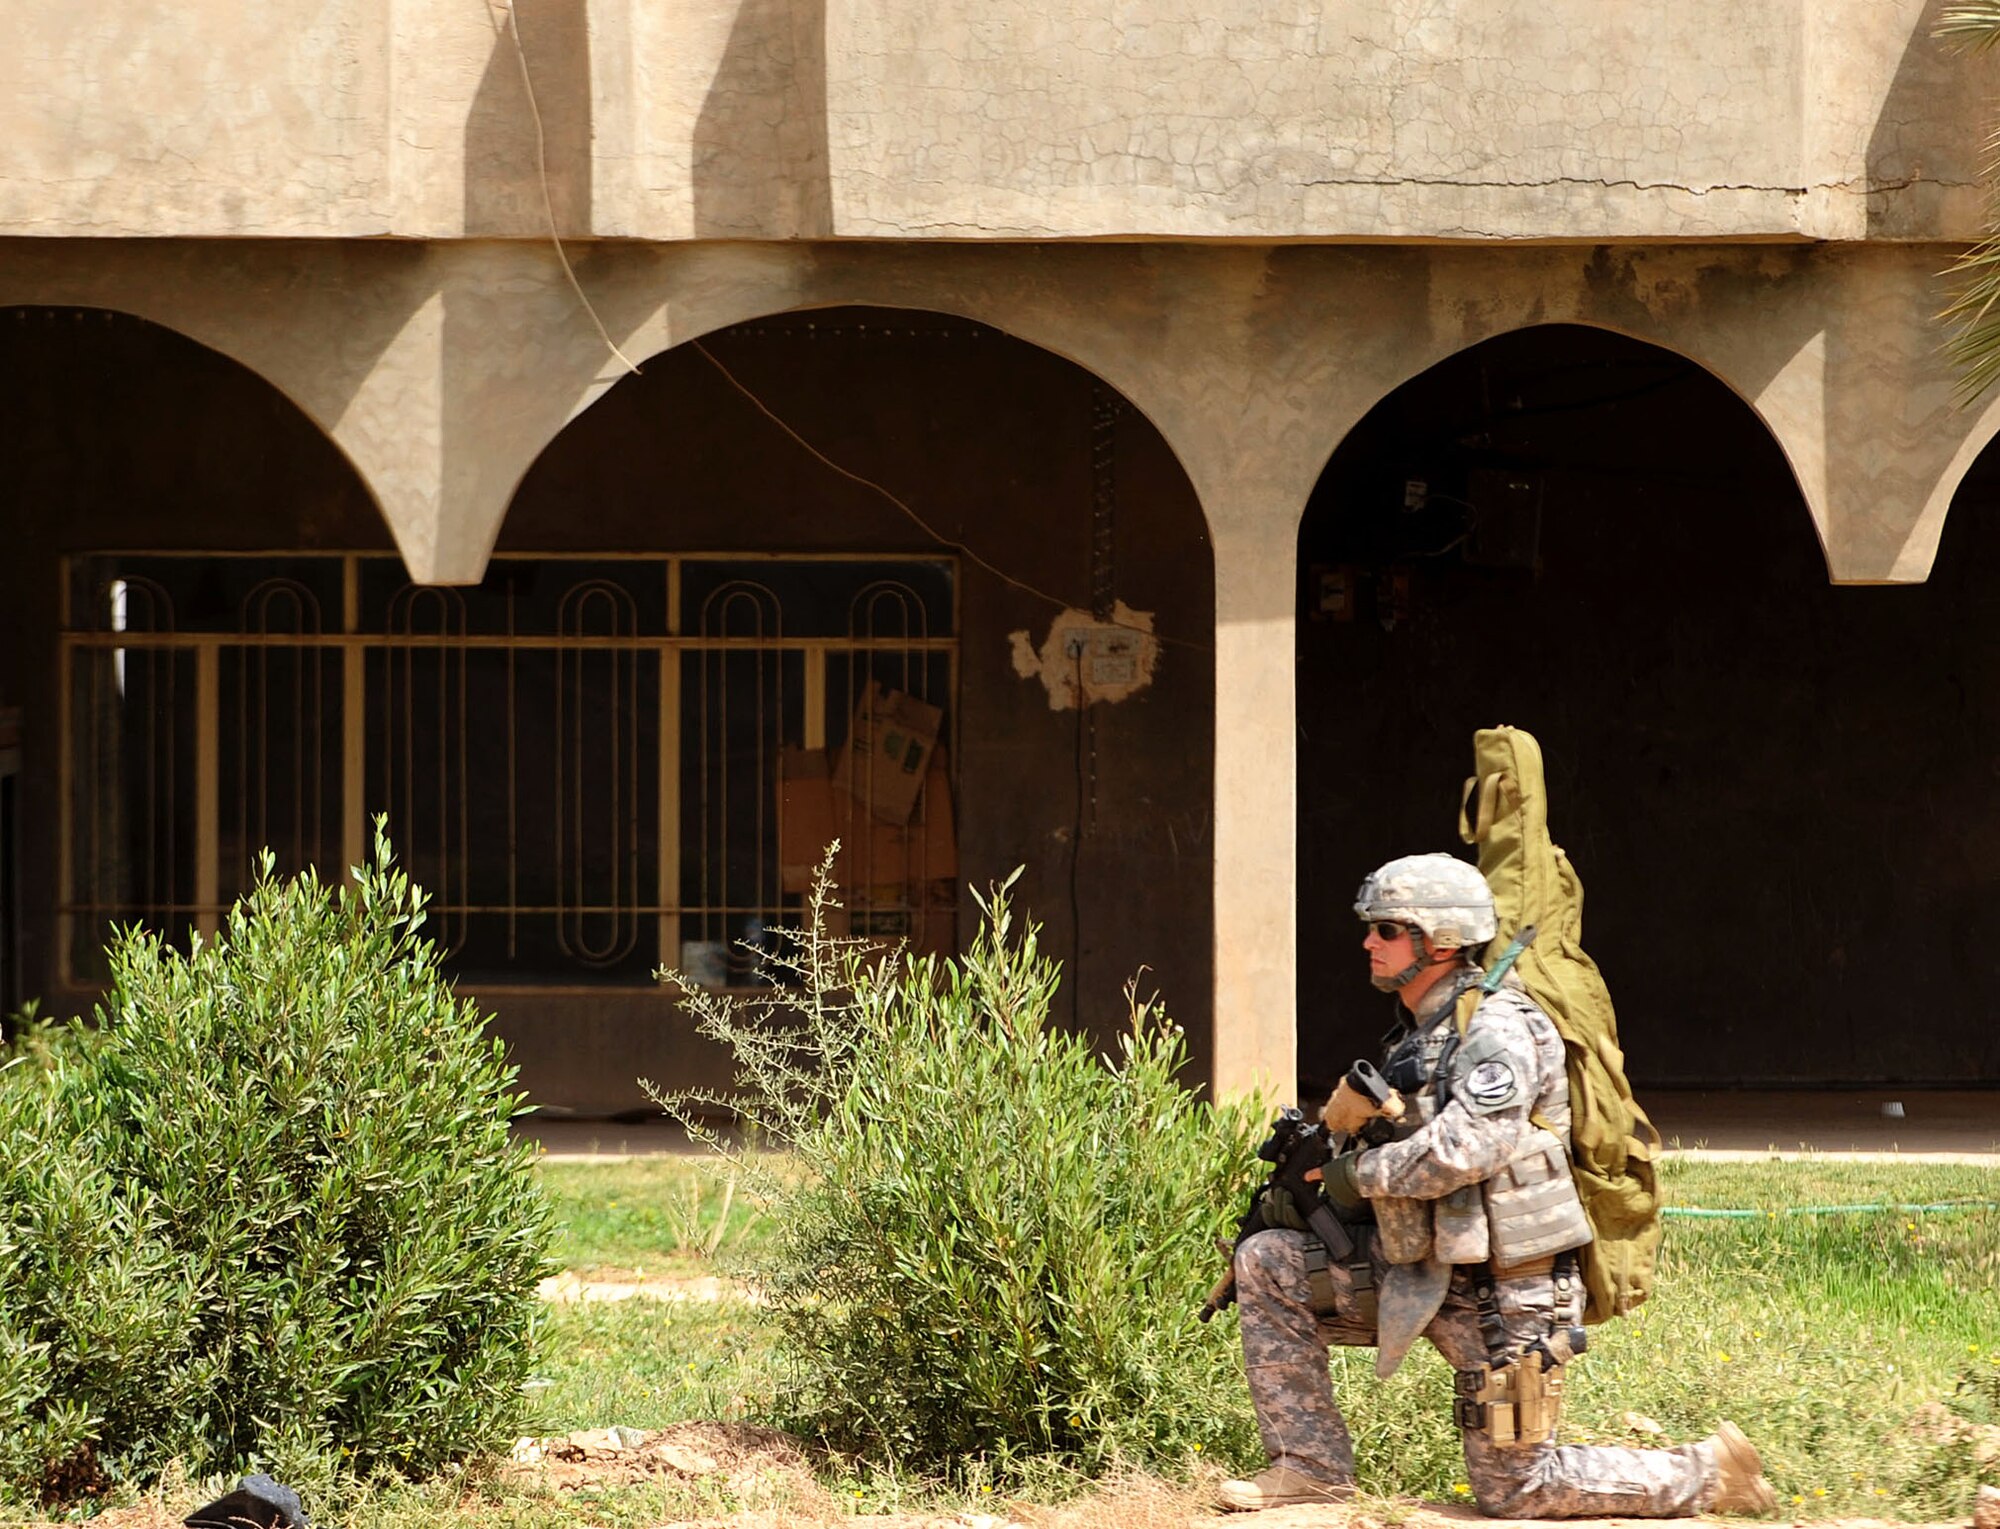 Senior Airman Brian Hafner conducts security during a patrol in Bakr Village April 9 in support of Operation Iraqi Freedom. He is assigned to the 532nd Security Forces Squadron at Joint Base Balad, Iraq. (U.S. Air Force photo/Staff Sgt. James L. Harper Jr.)